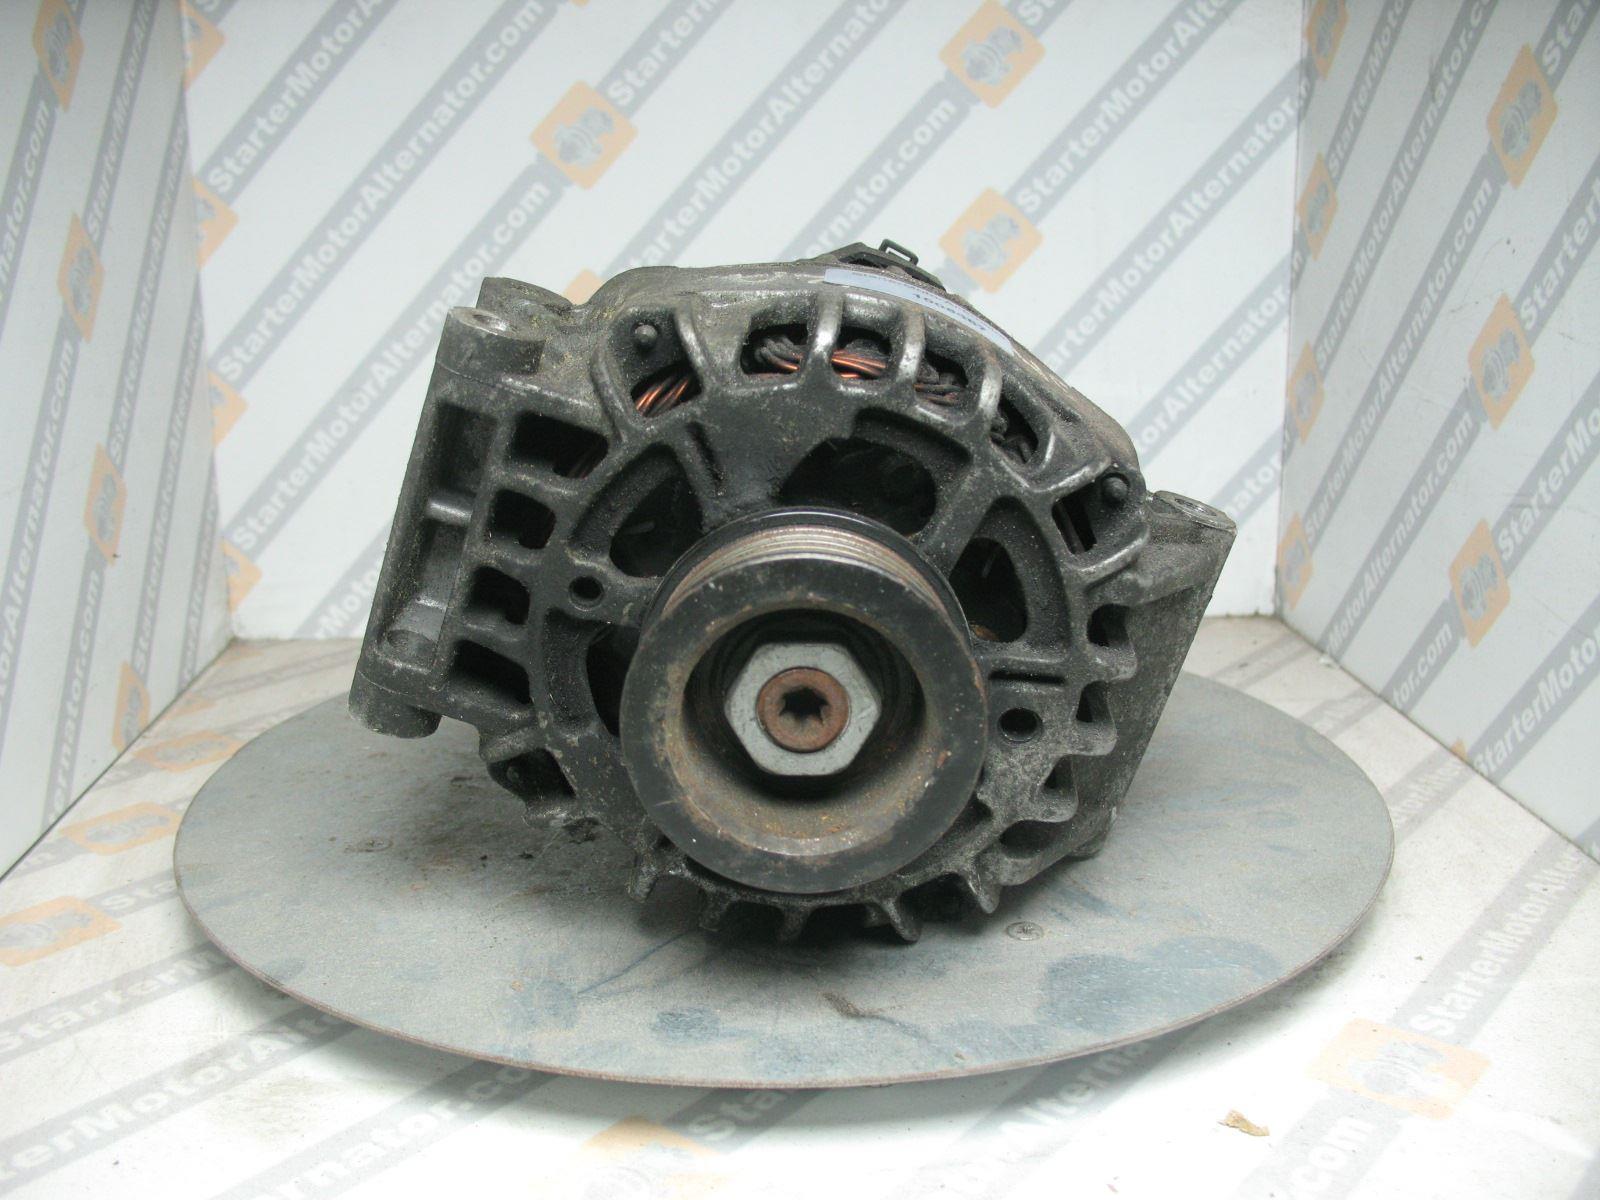 XIA3297 Alternator For Superseded To Aea4260